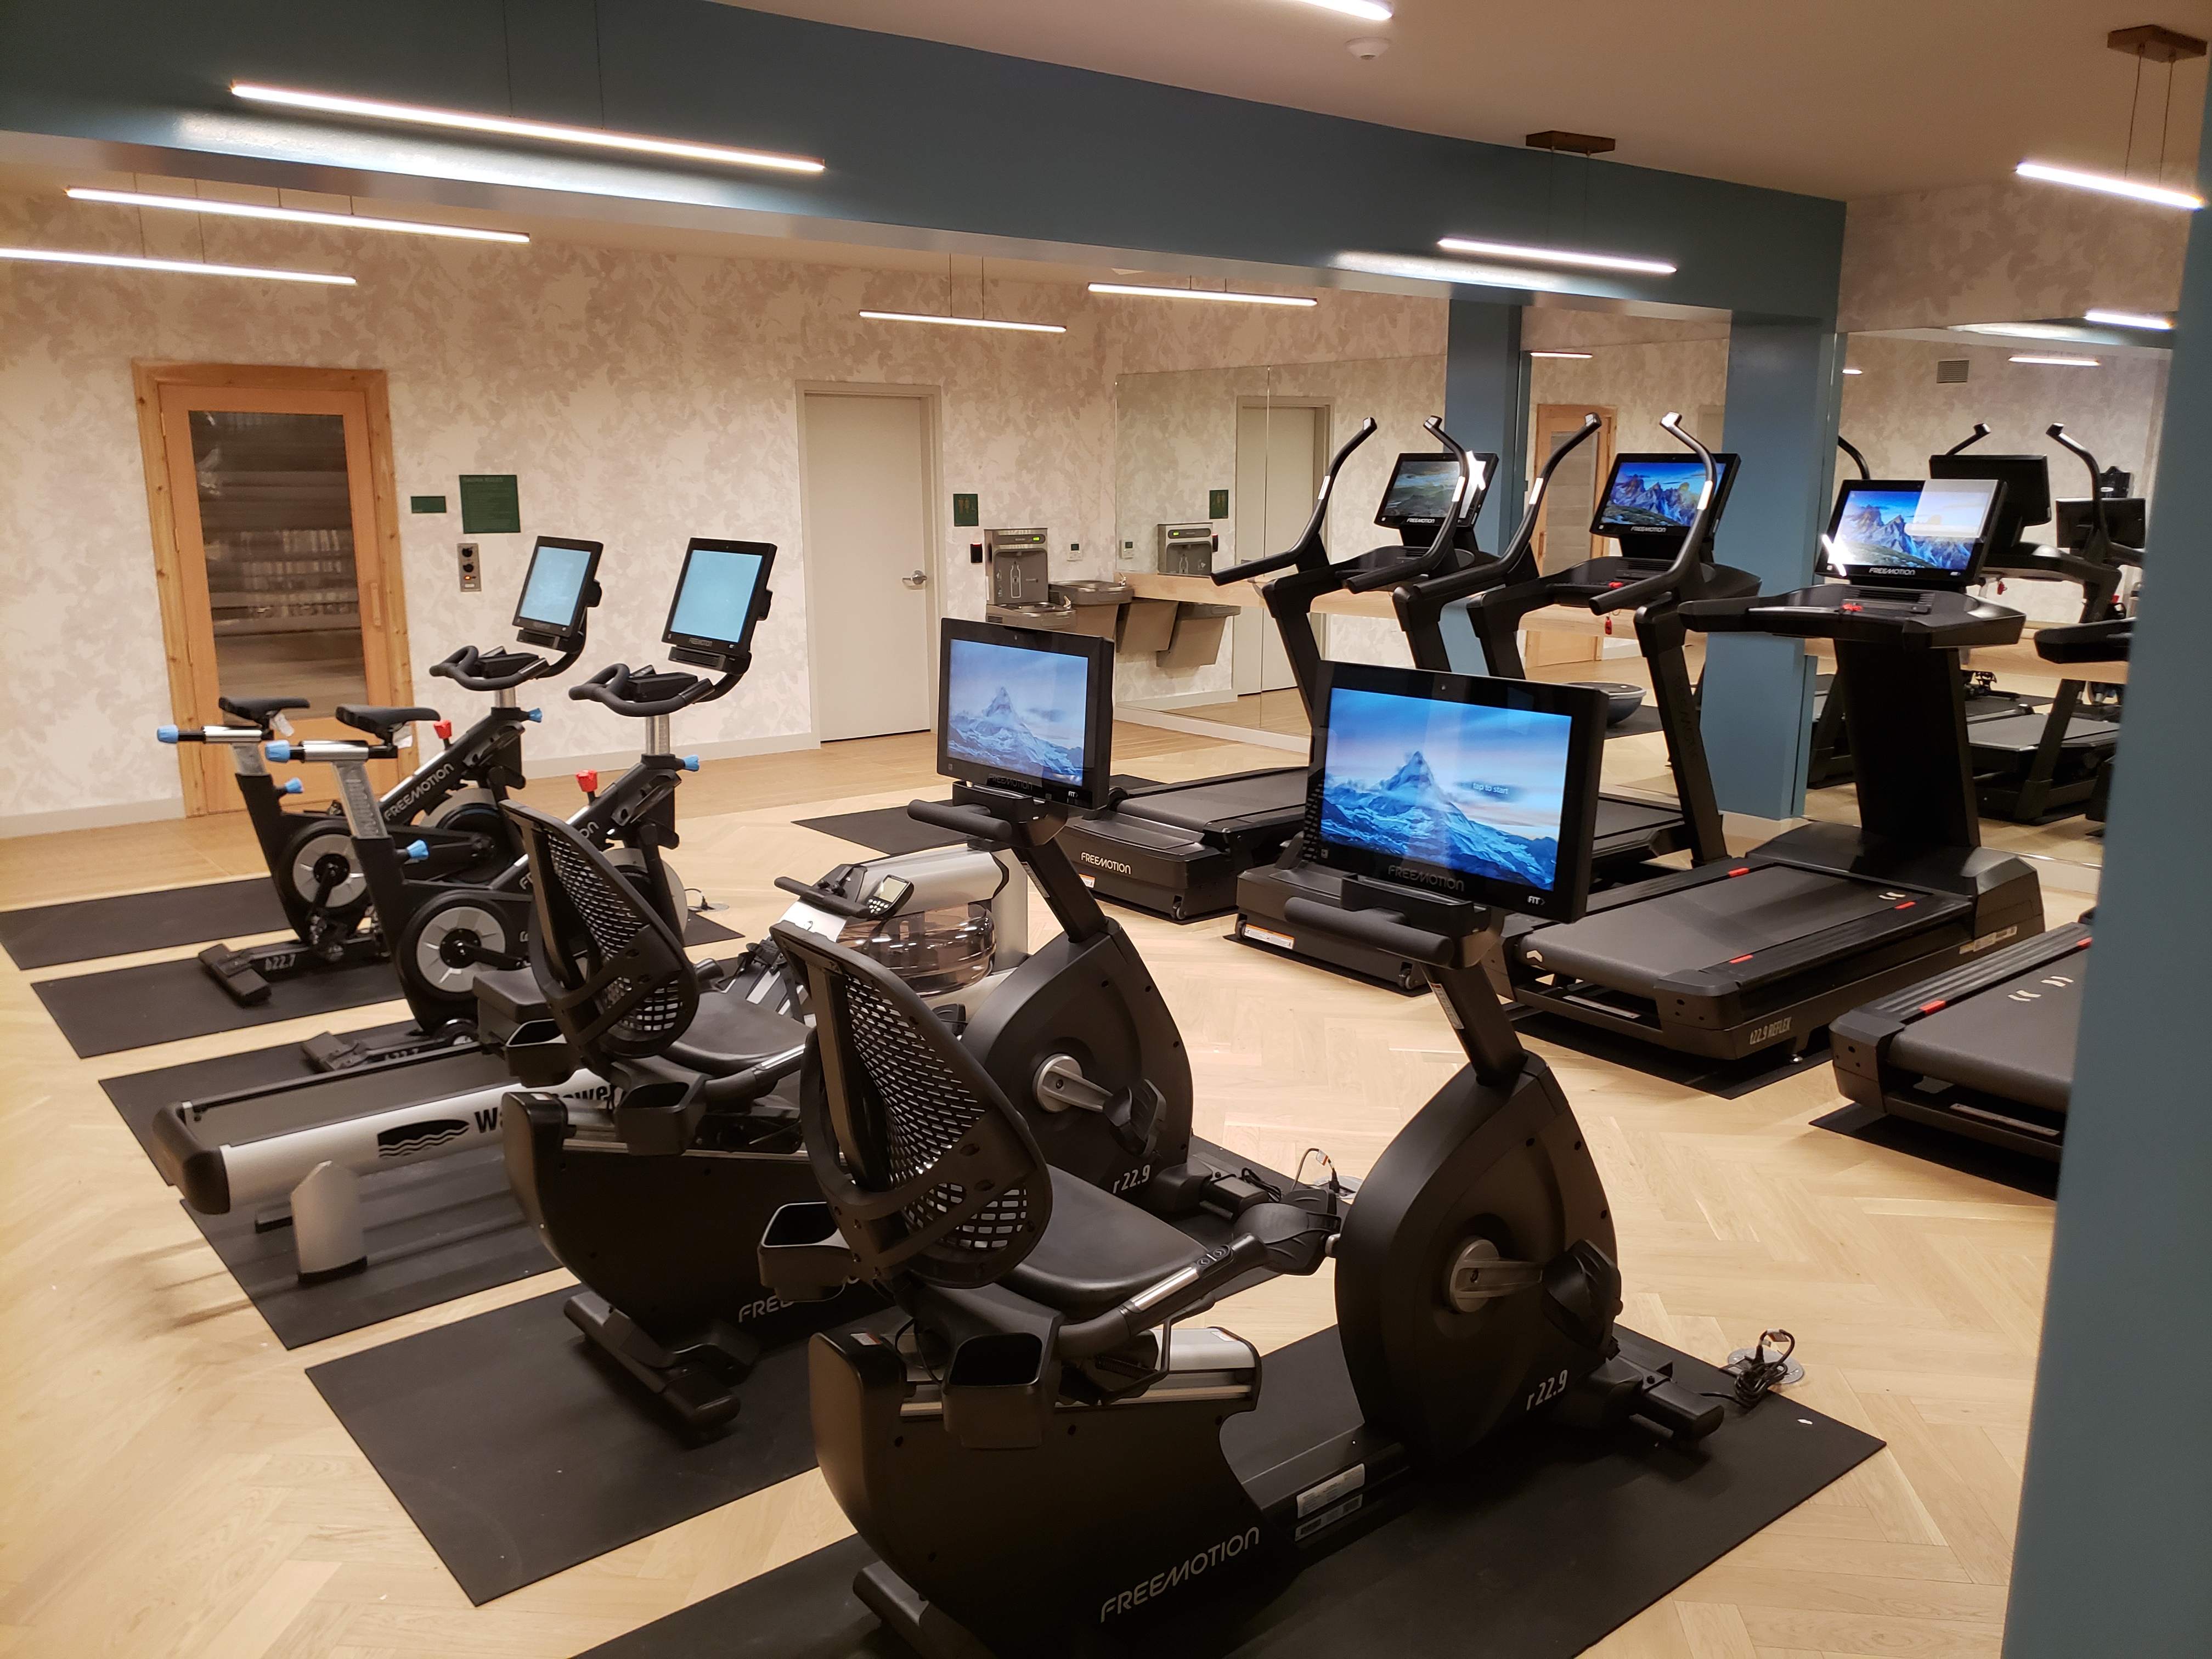 A row of indoor exercise bikes in a gym